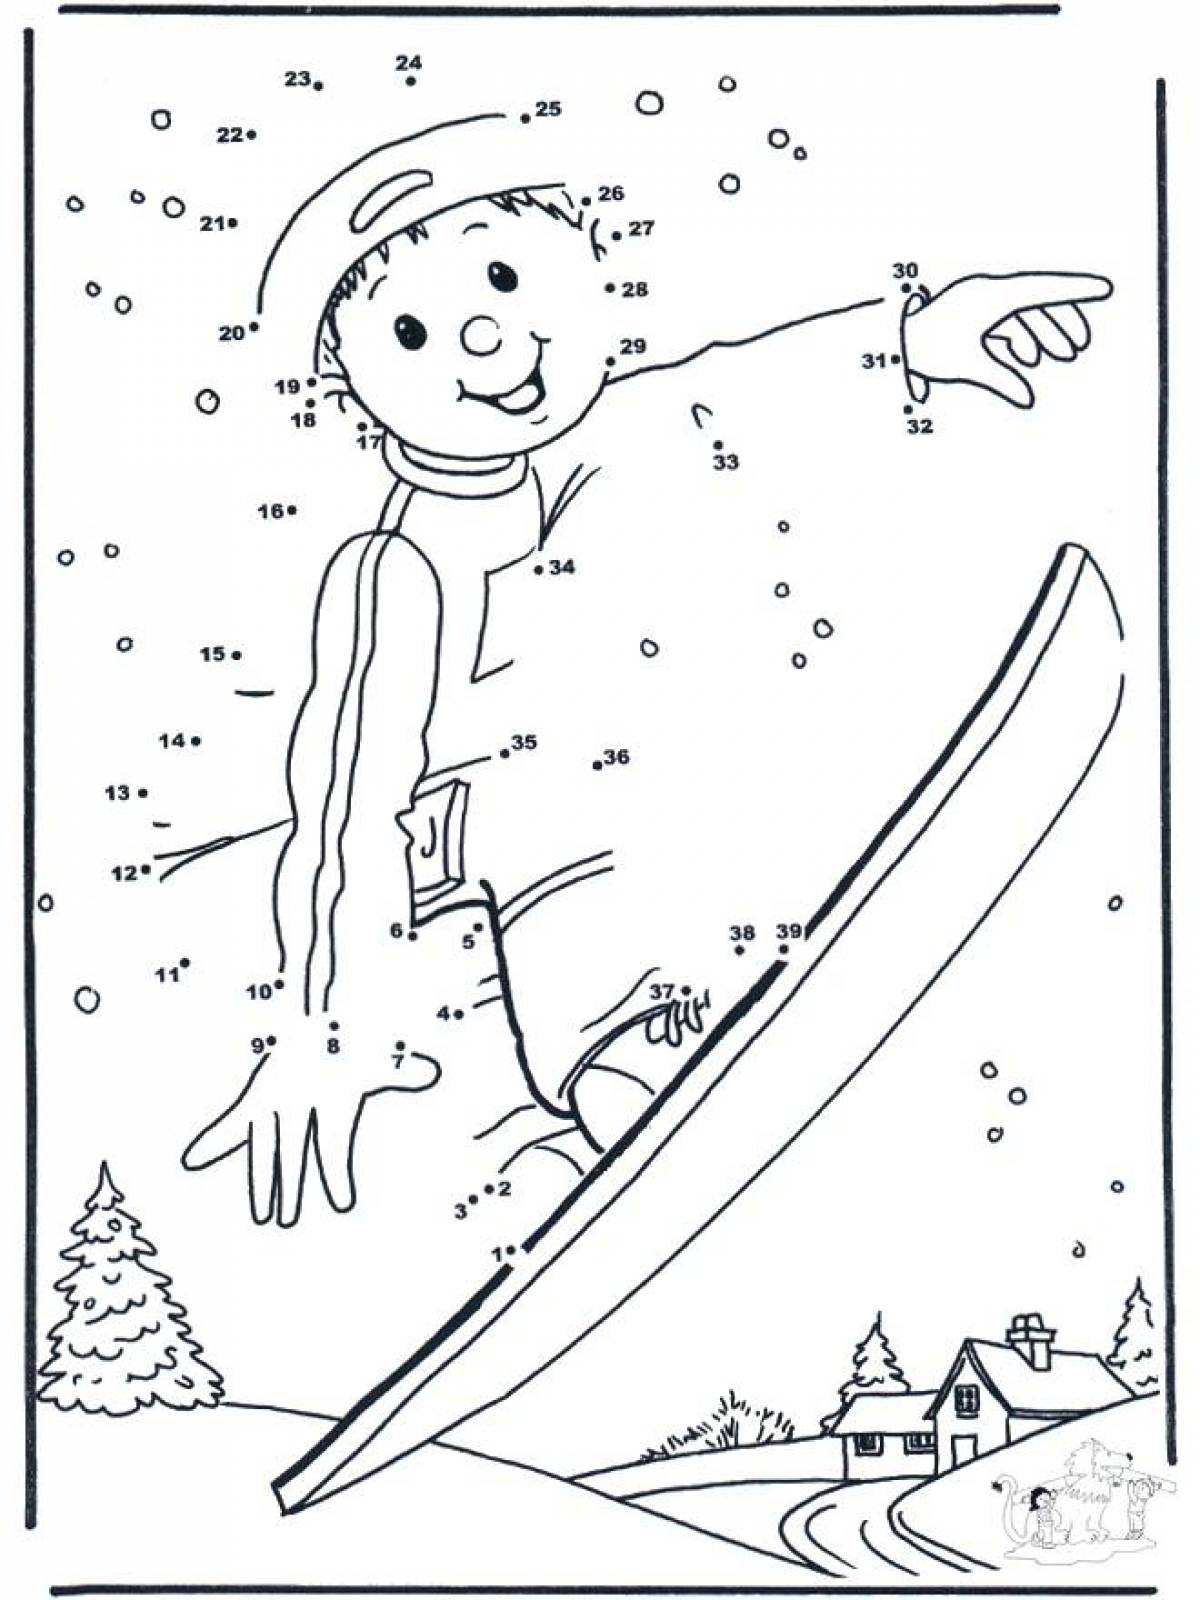 Colourful coloring book winter sports for children 6-7 years old